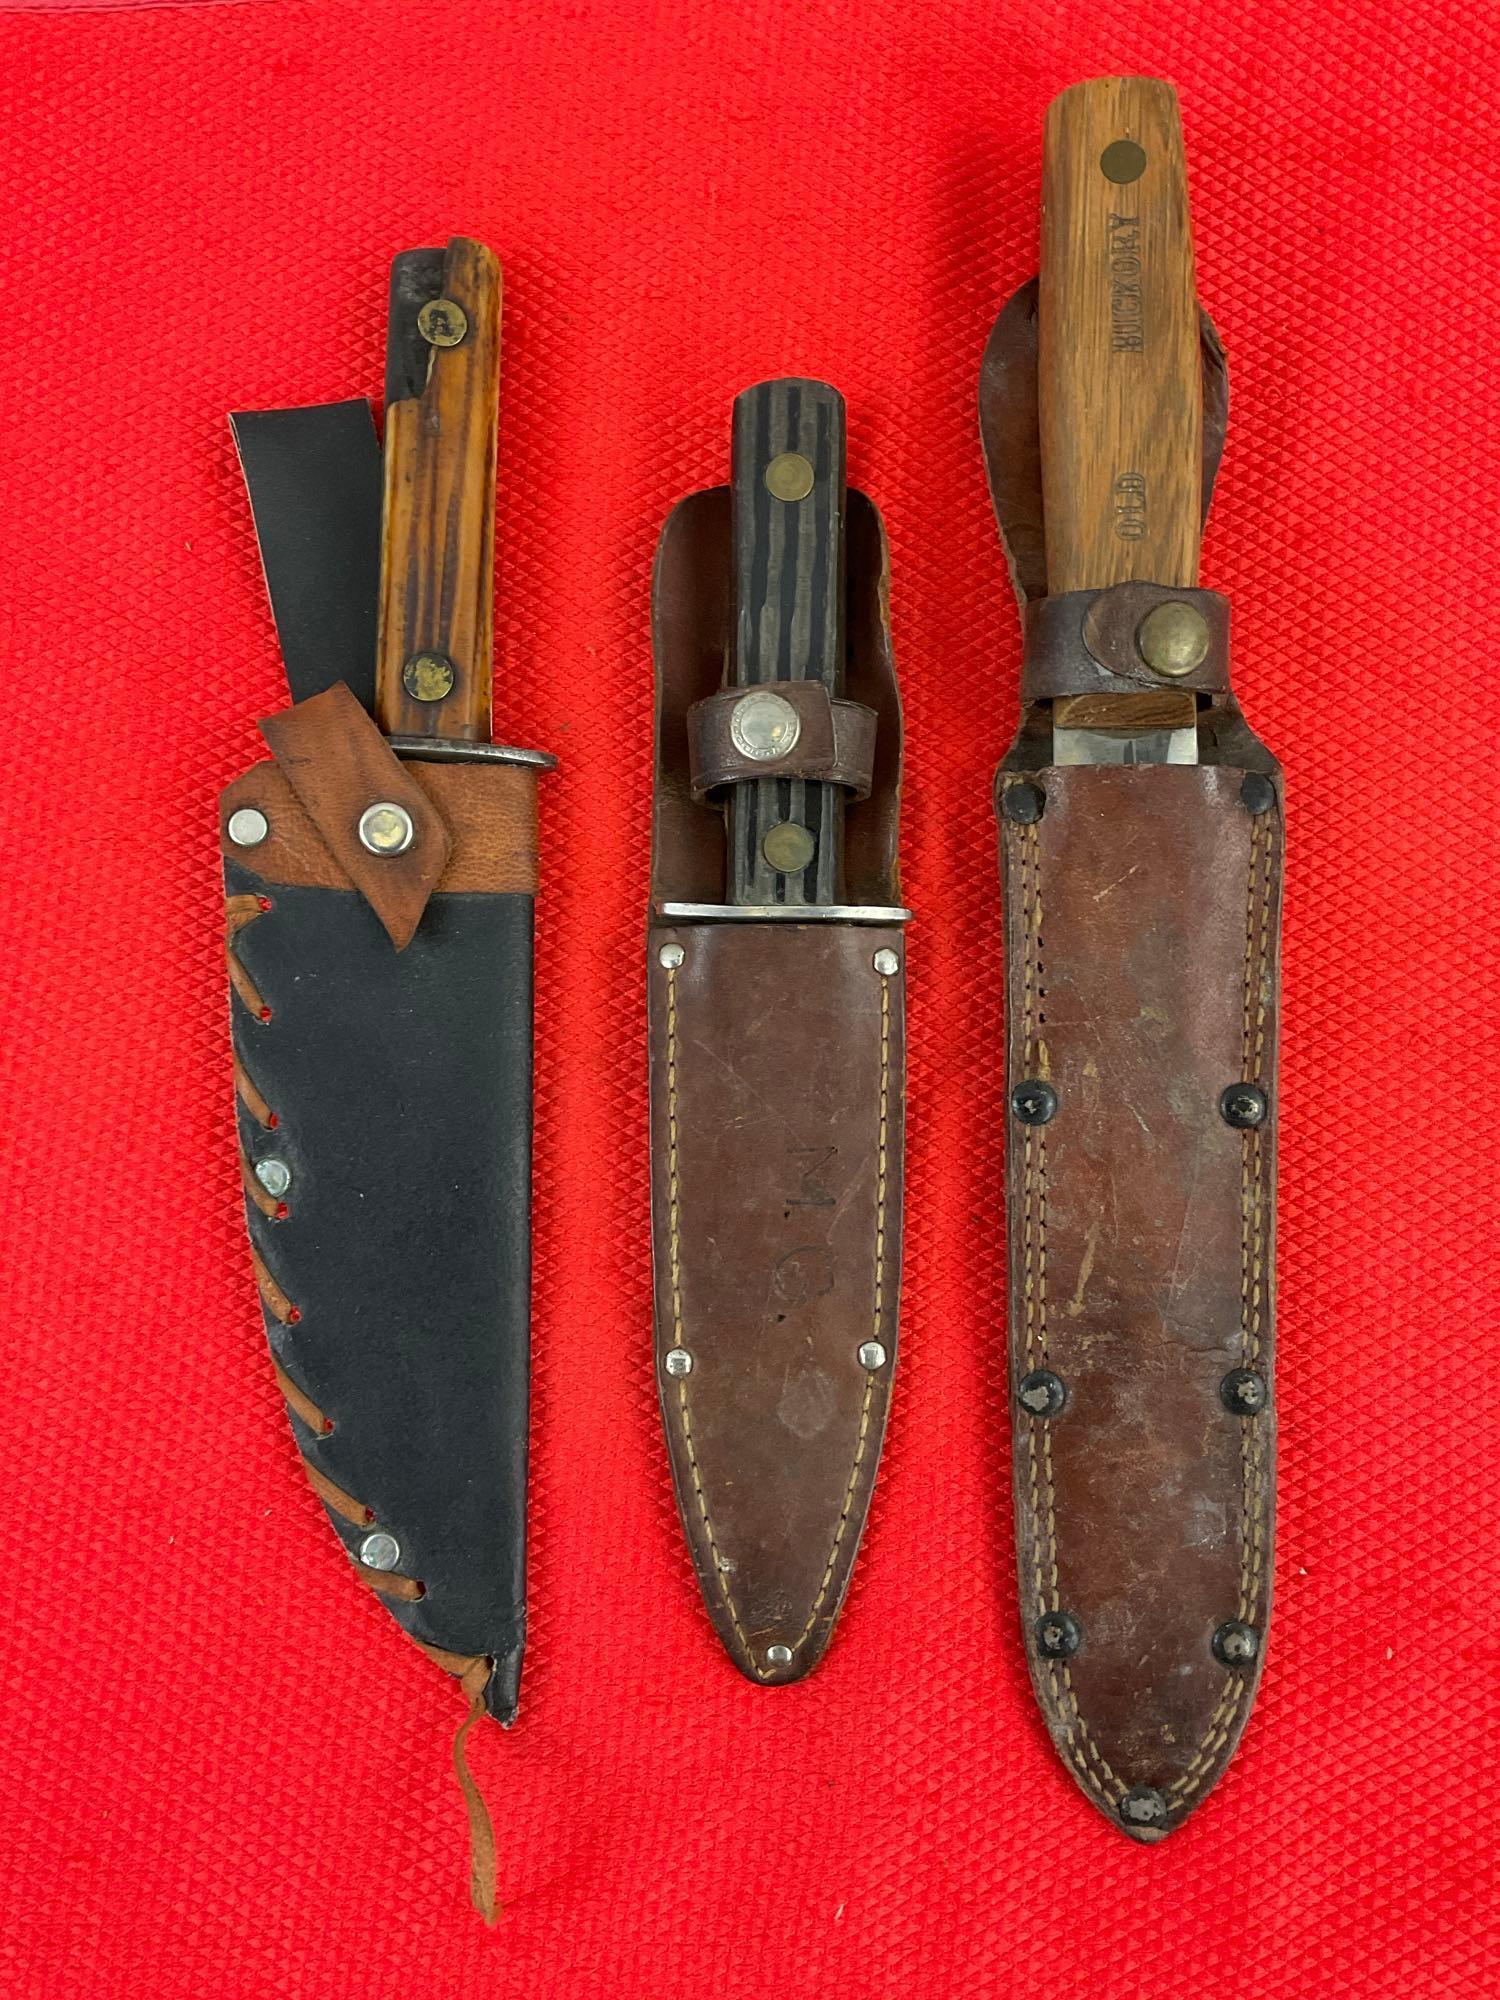 3 pcs Vintage Steel Fixed Blade Knives. 1 Ontario Knife Co Old Hickory, 2 Unknown Models. See pics.